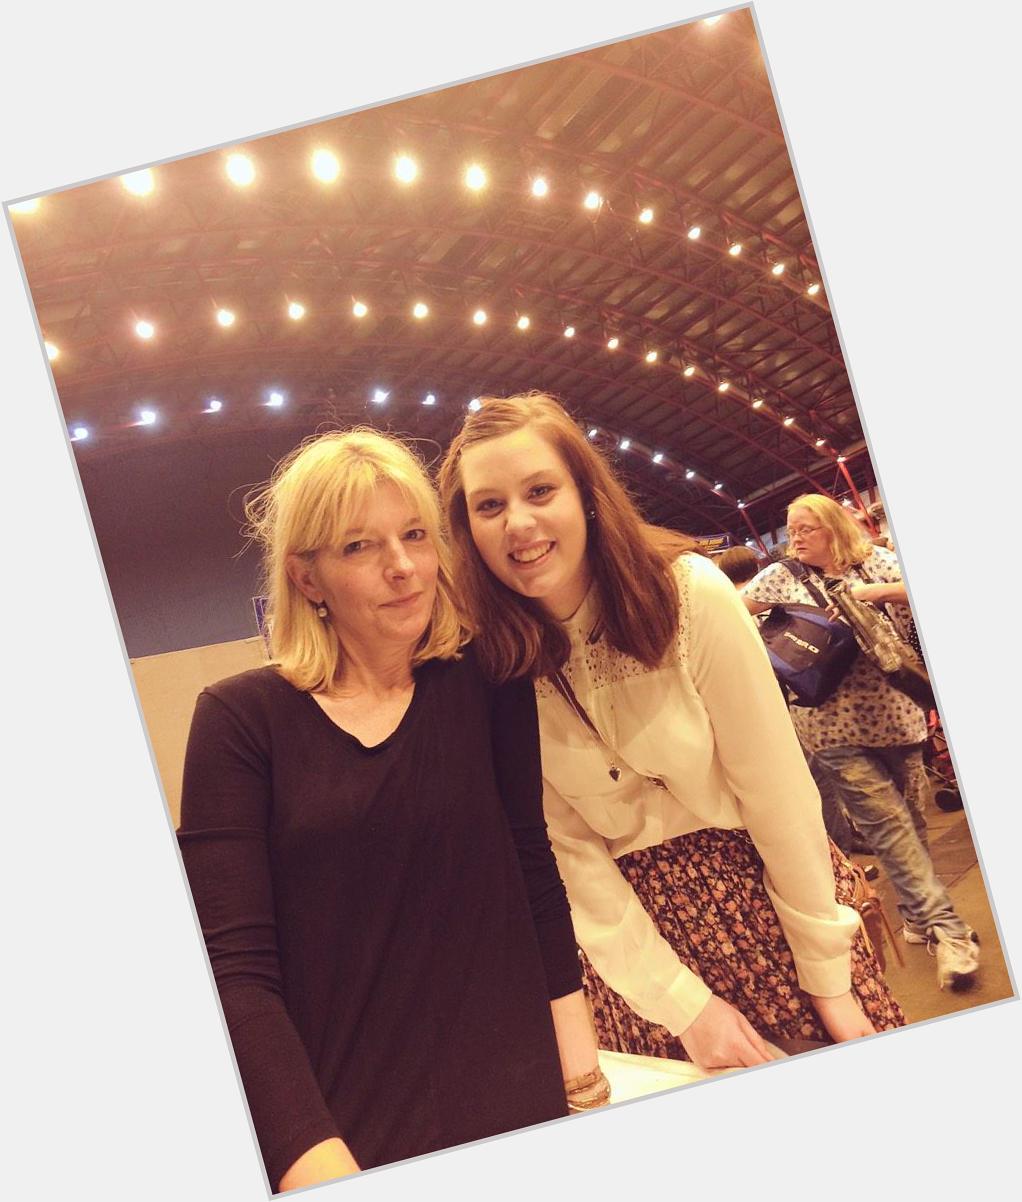 Happy birthday, Jemma Redgrave! It was very nice talking to you last summer.  